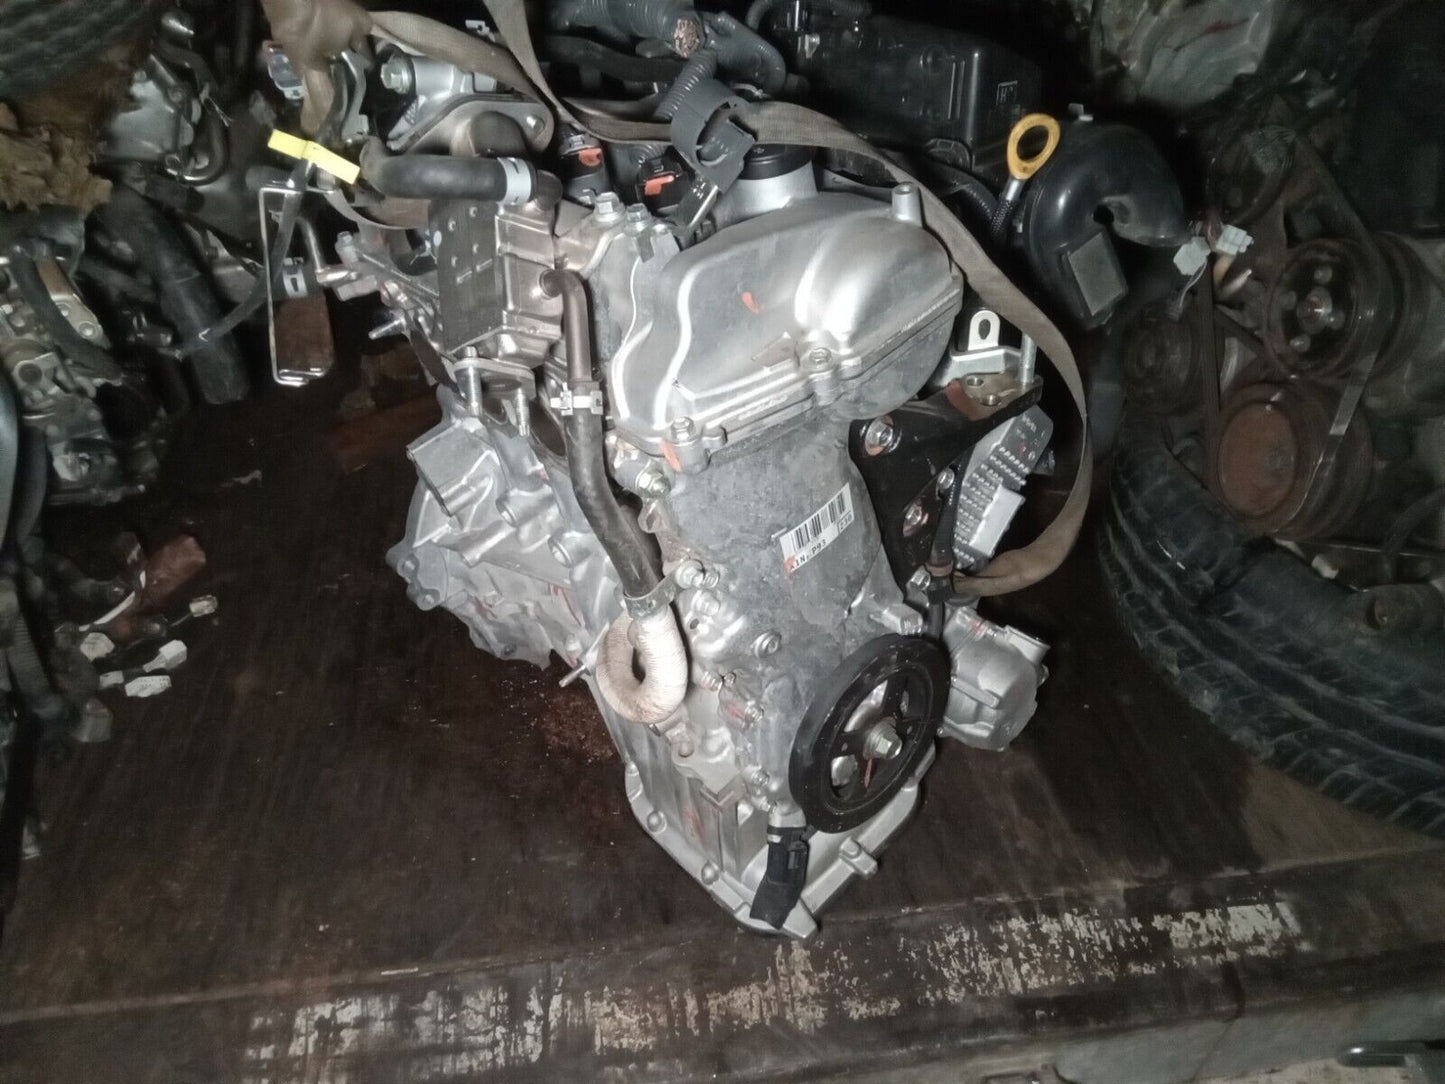 12 13 14 15 16 17 18 19 TOYOTA PRIUS C 1.5L ENGINE MOTOR ASSEMBLY 1NZFXE VIN B3